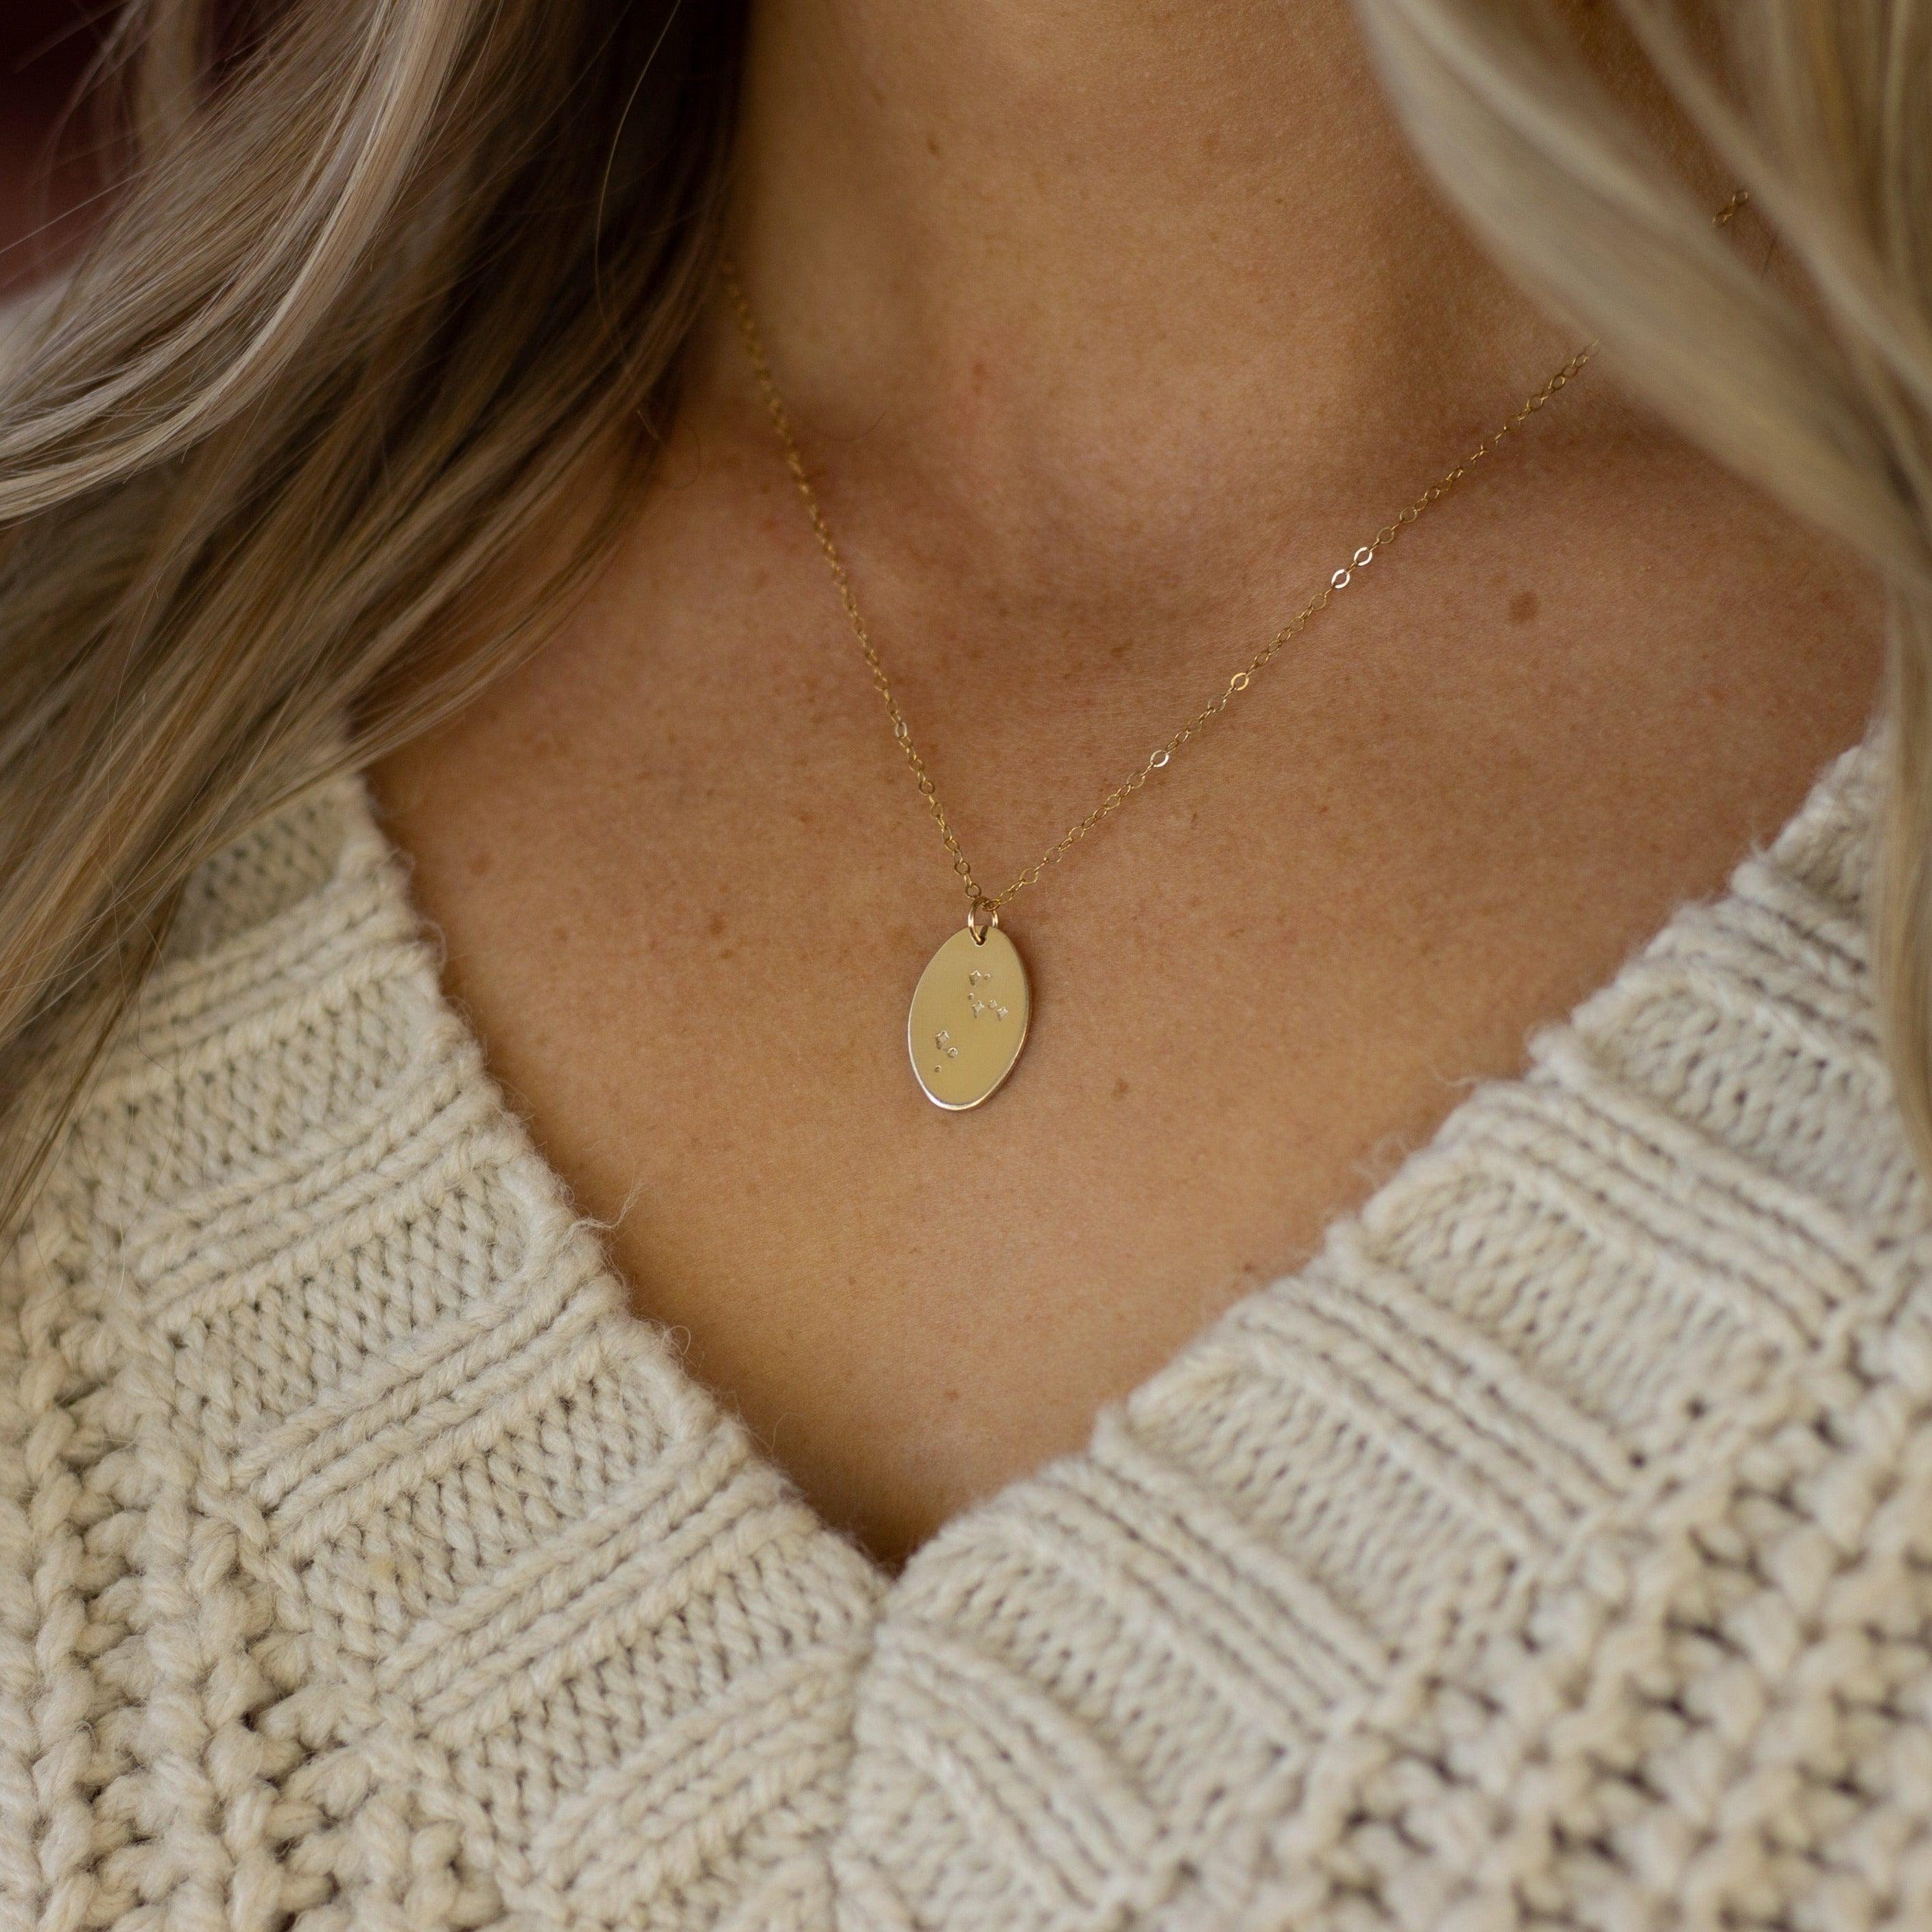 Liv Zodiac Constellation Necklace - Nolia Jewelry - Meaningful + Sustainably Handcrafted Jewelry